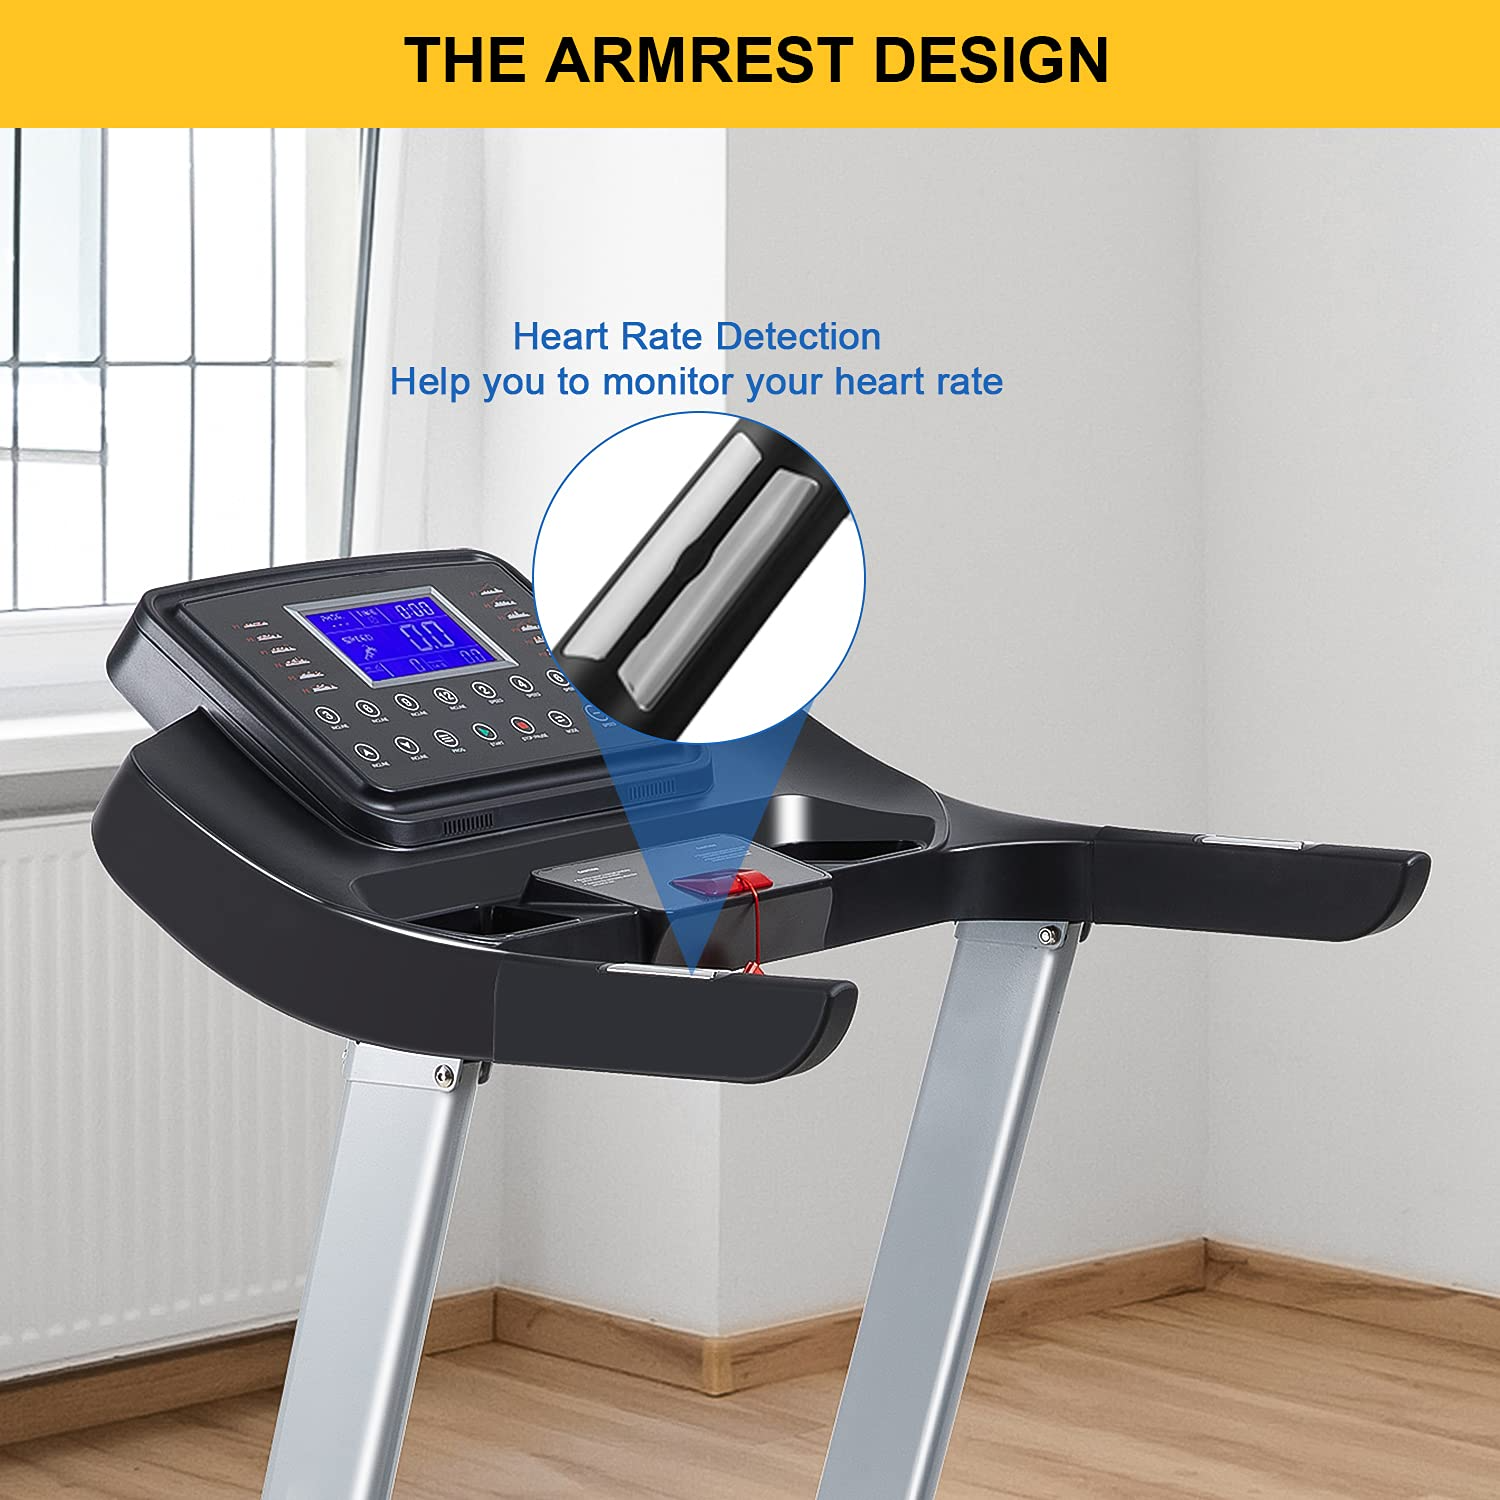 Load image into Gallery viewer, Electric Folding Treadmill with Auto Incline, Max Capacity 300LBS
